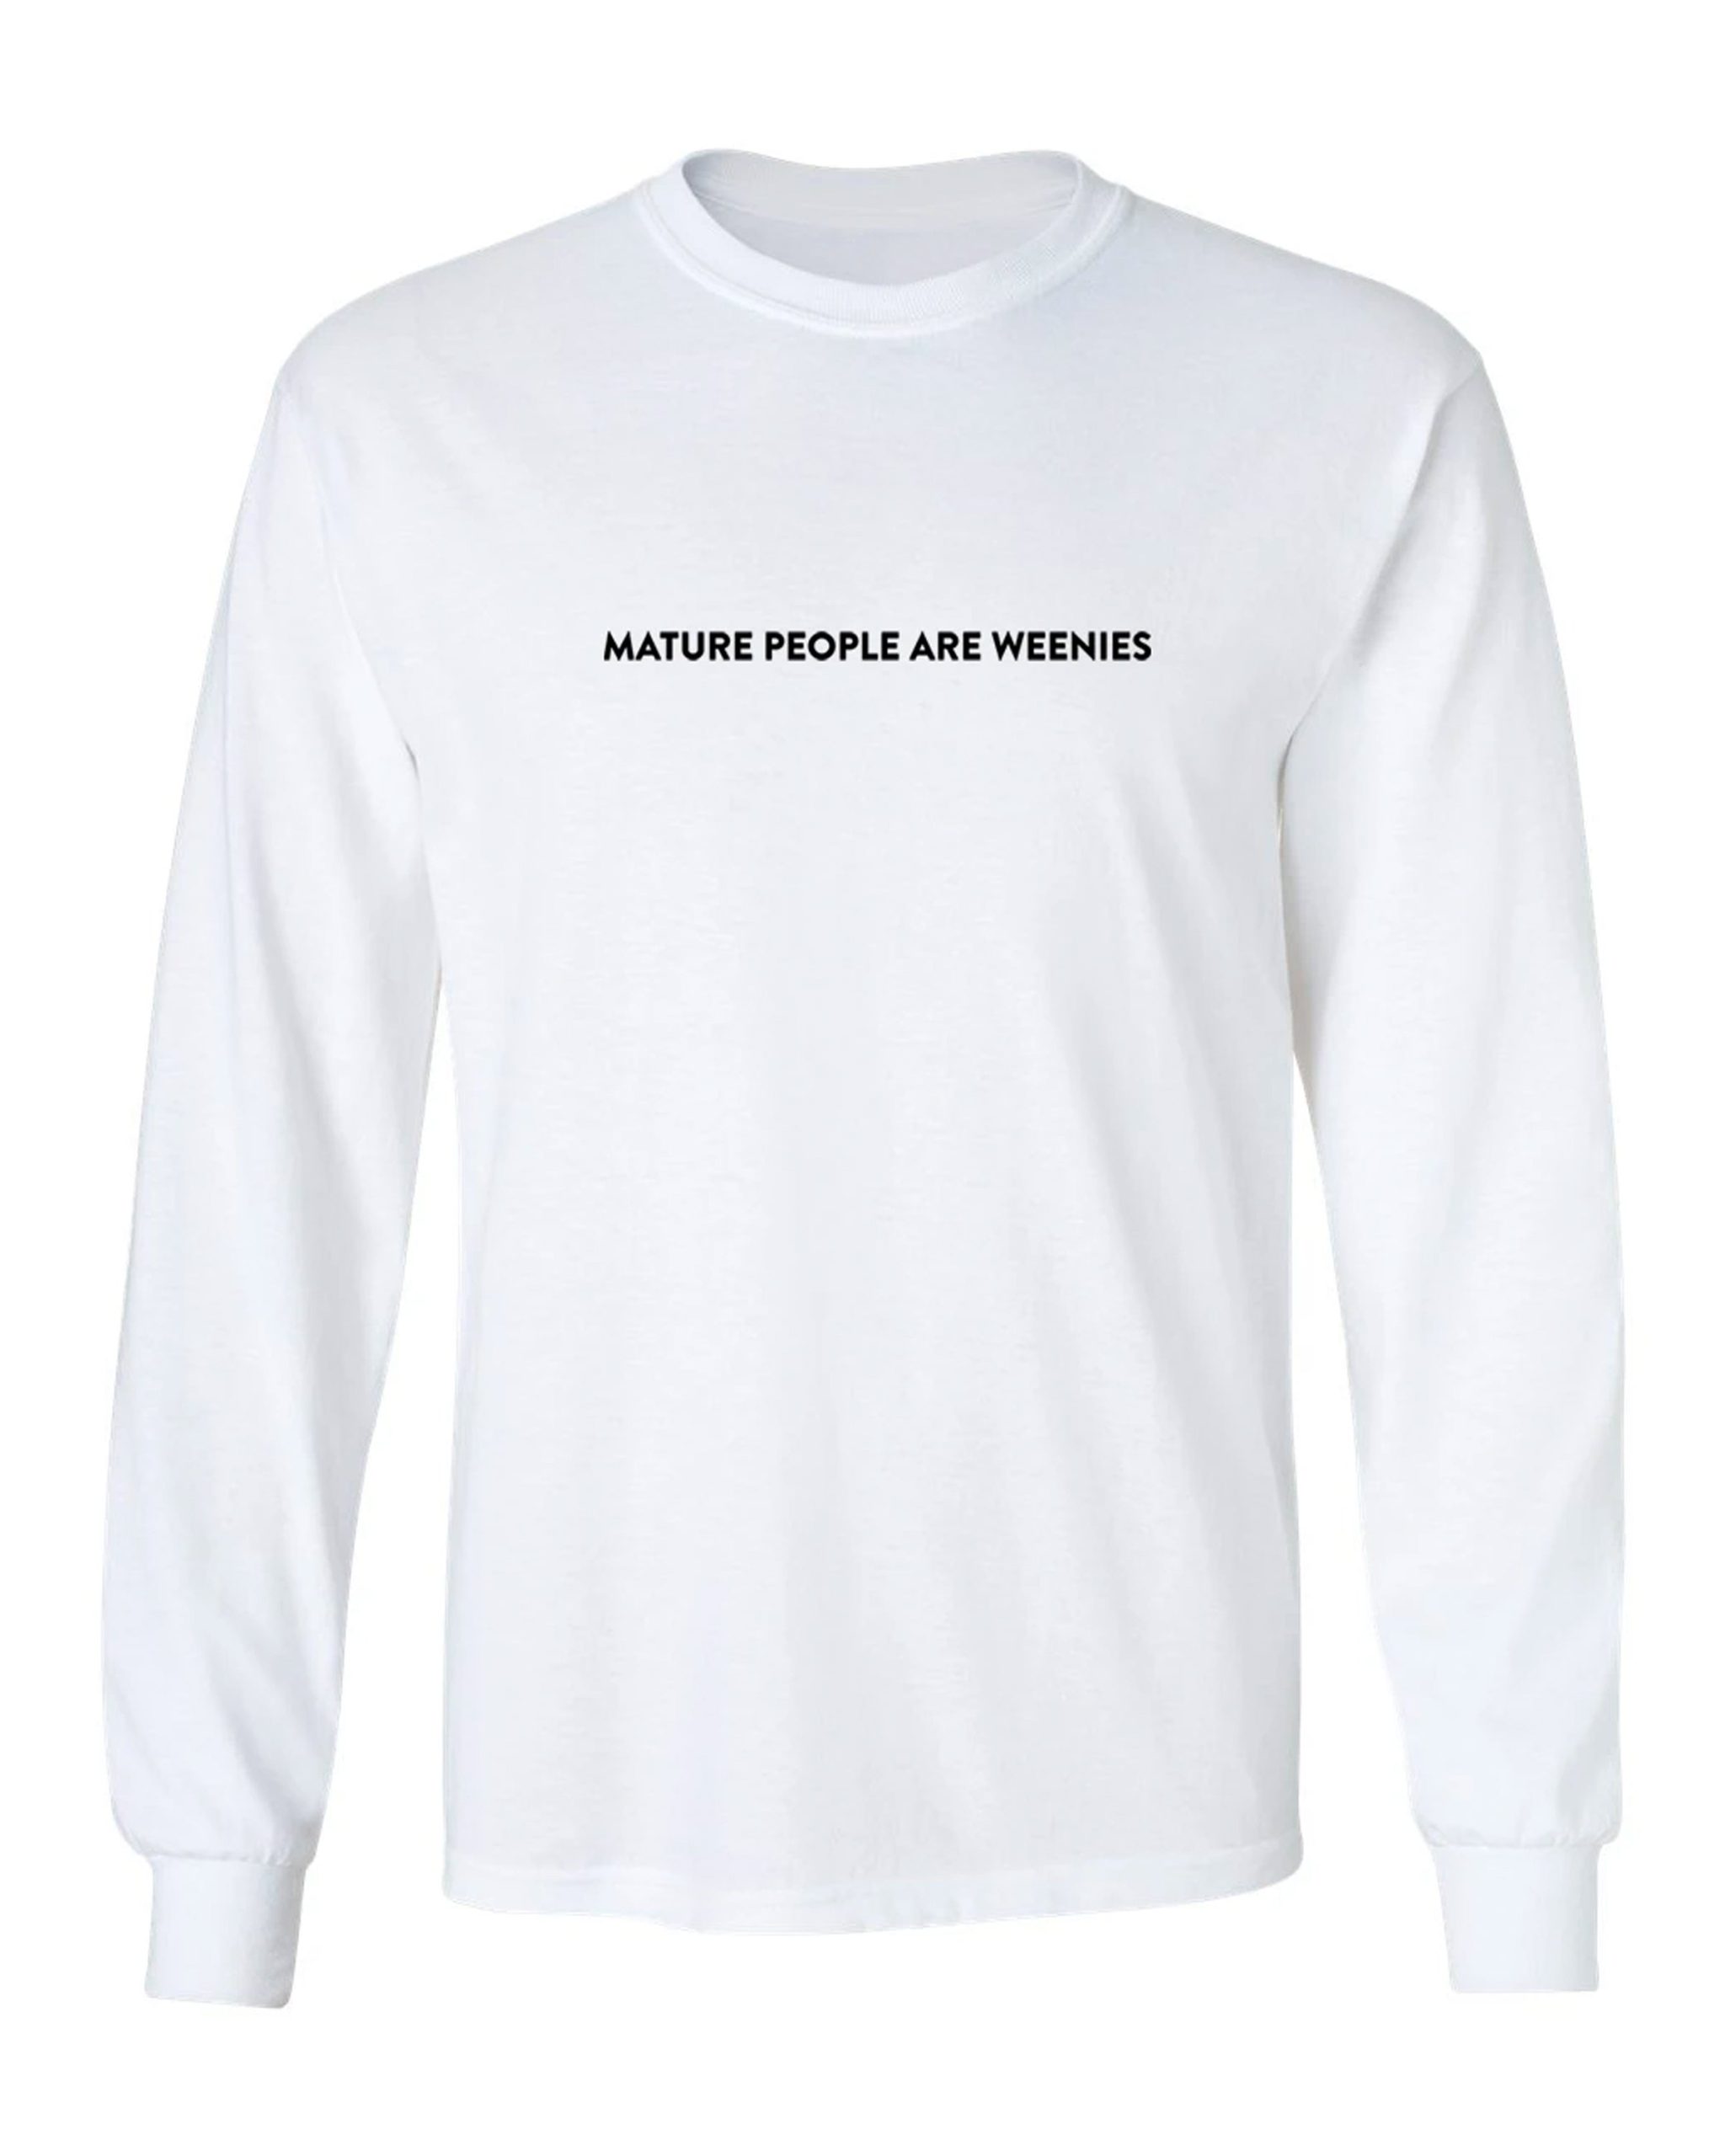 Mature People are Weenies White Long Sleeve - Official Merch by Baylen ...